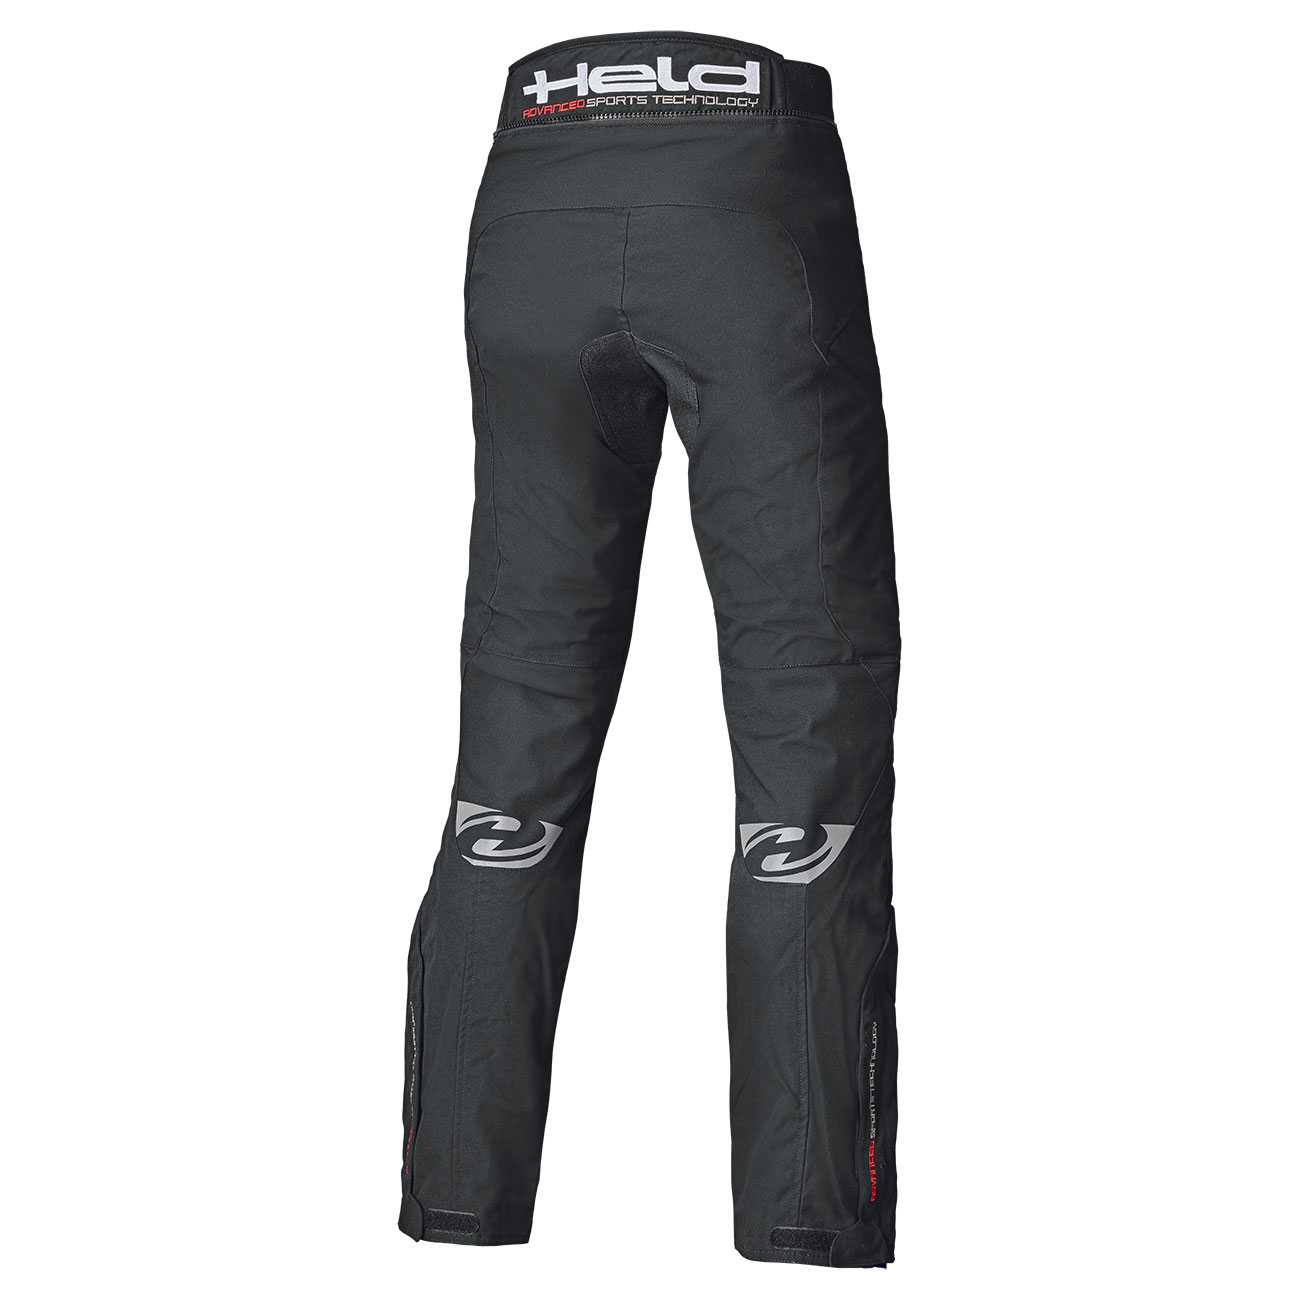 Link Sport trousers